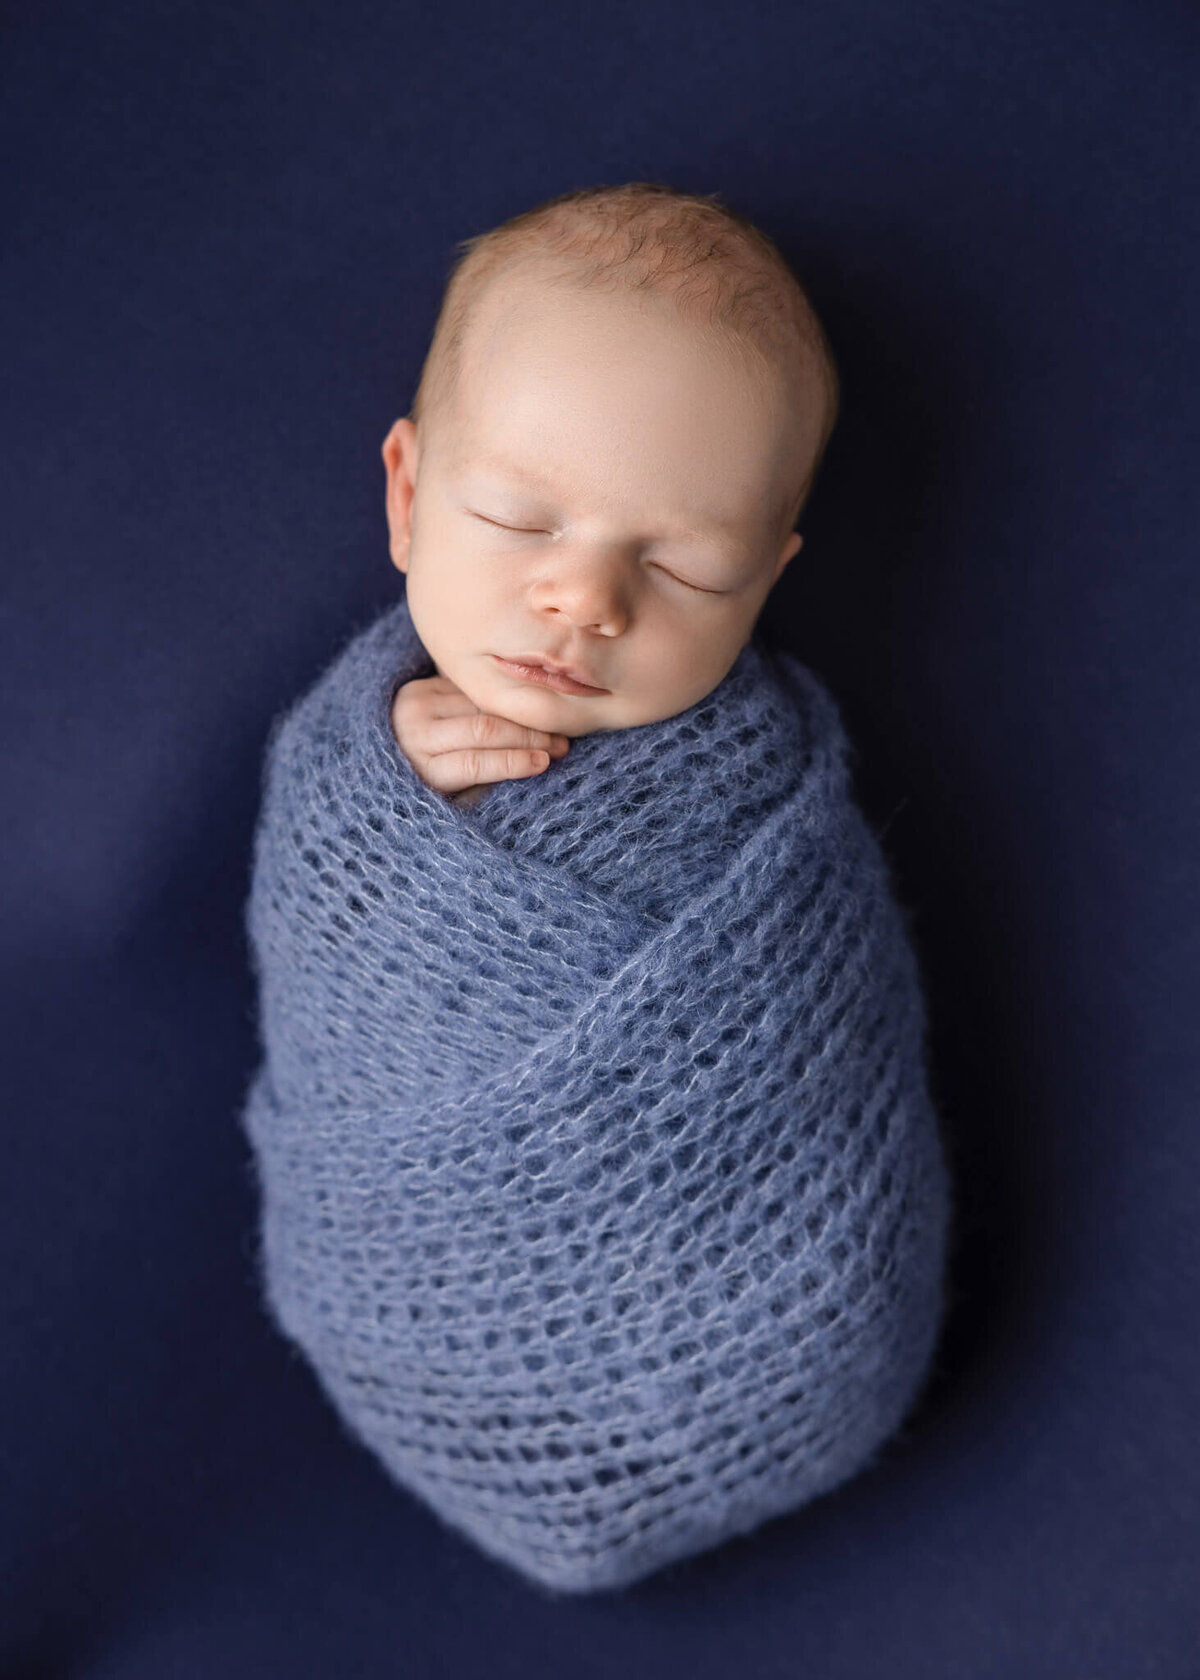 newborn baby asleep on blue fabric wrapped in blue knitted wrap